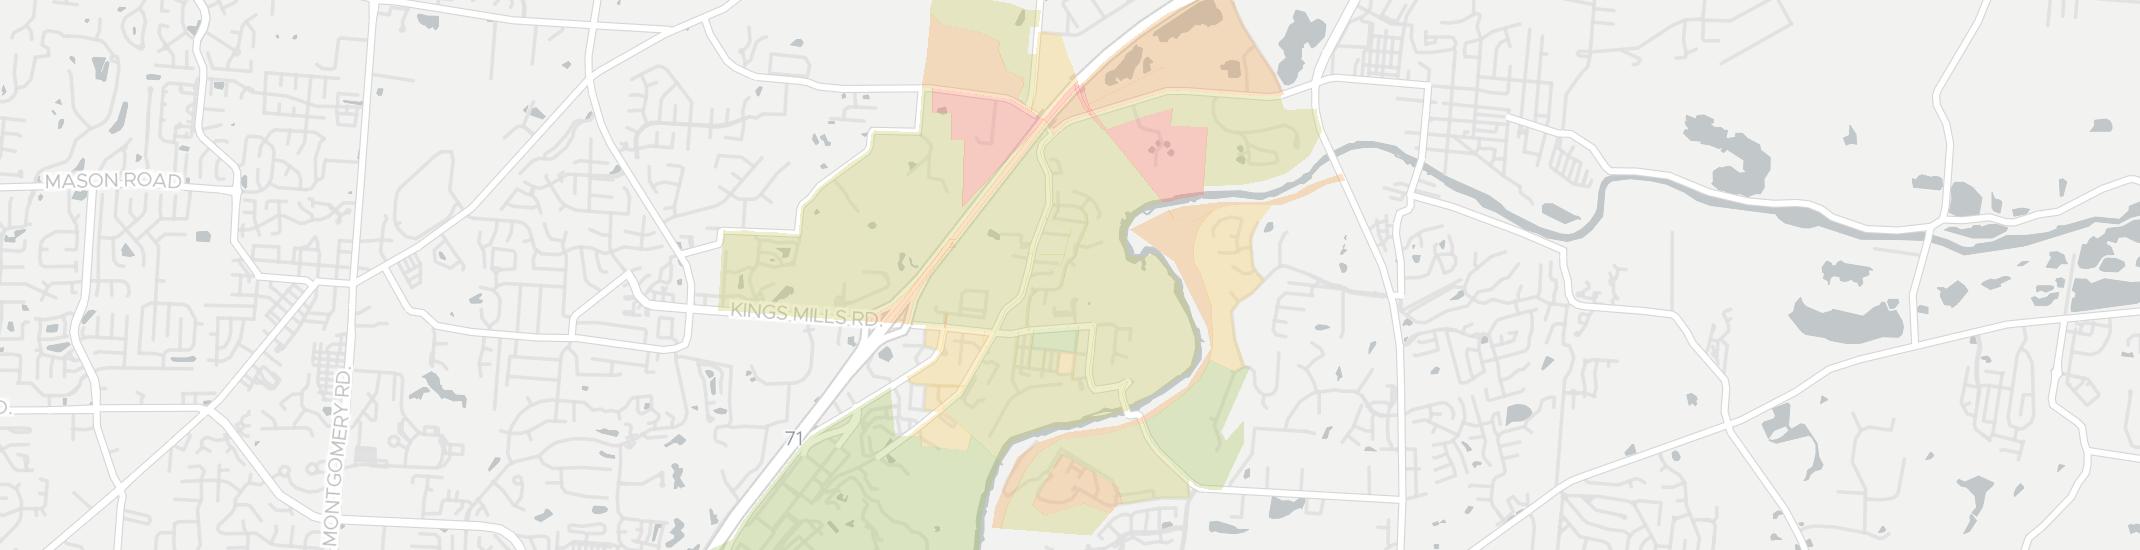 Kings Mills Internet Competition Map. Click for interactive map